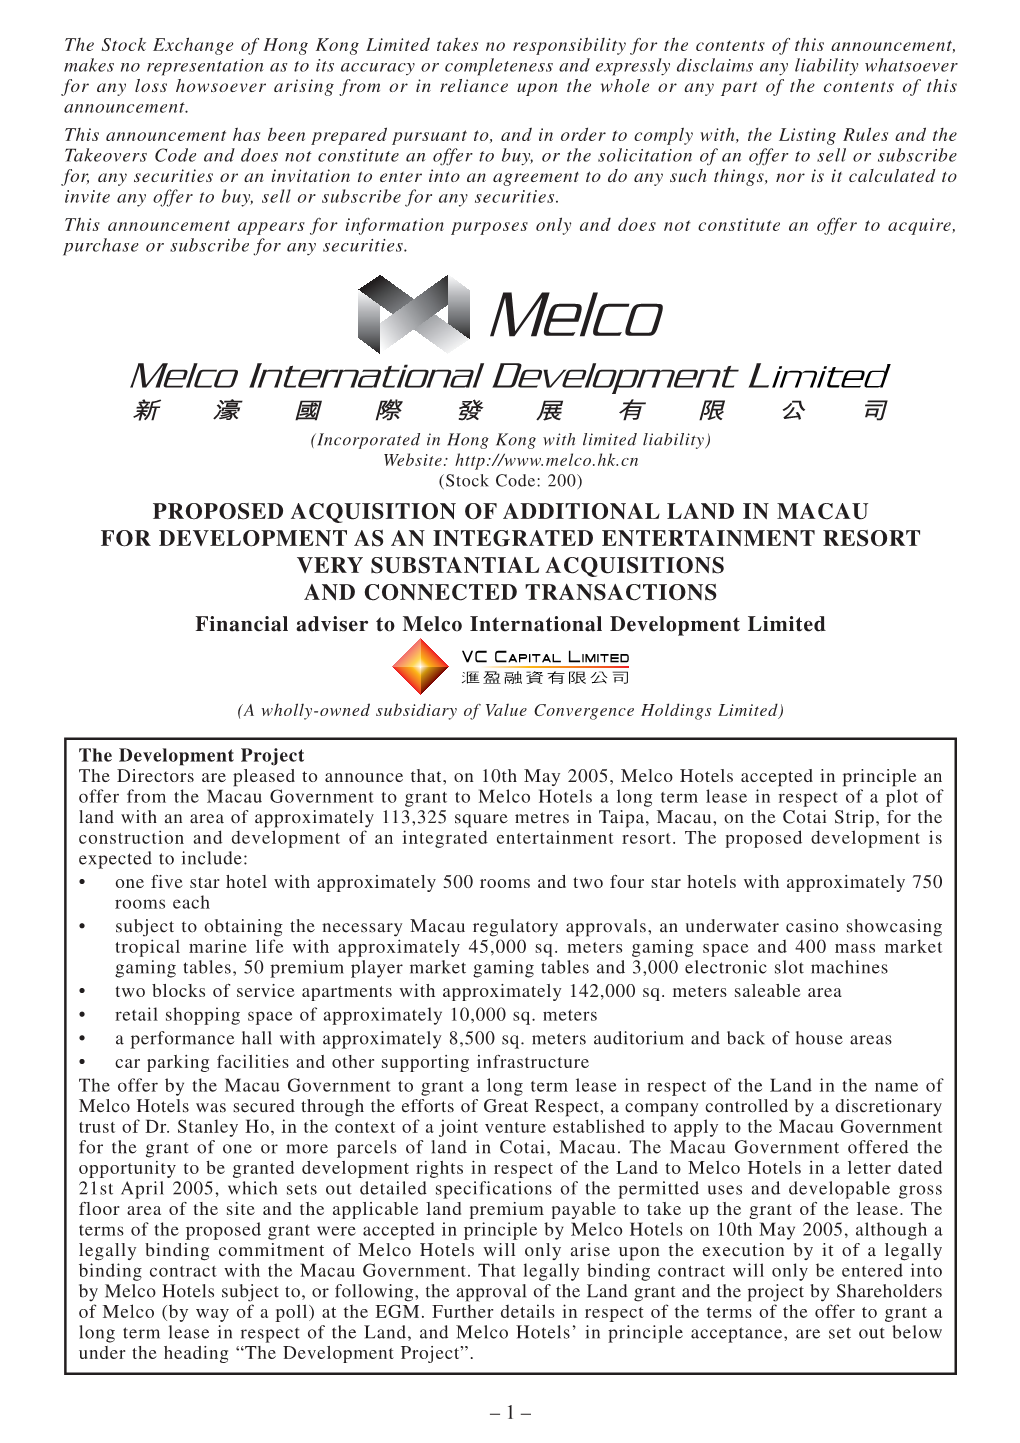 Stanley Ho, in the Context of a Joint Venture Established to Apply to the Macau Government for the Grant of One Or More Parcels of Land in Cotai, Macau